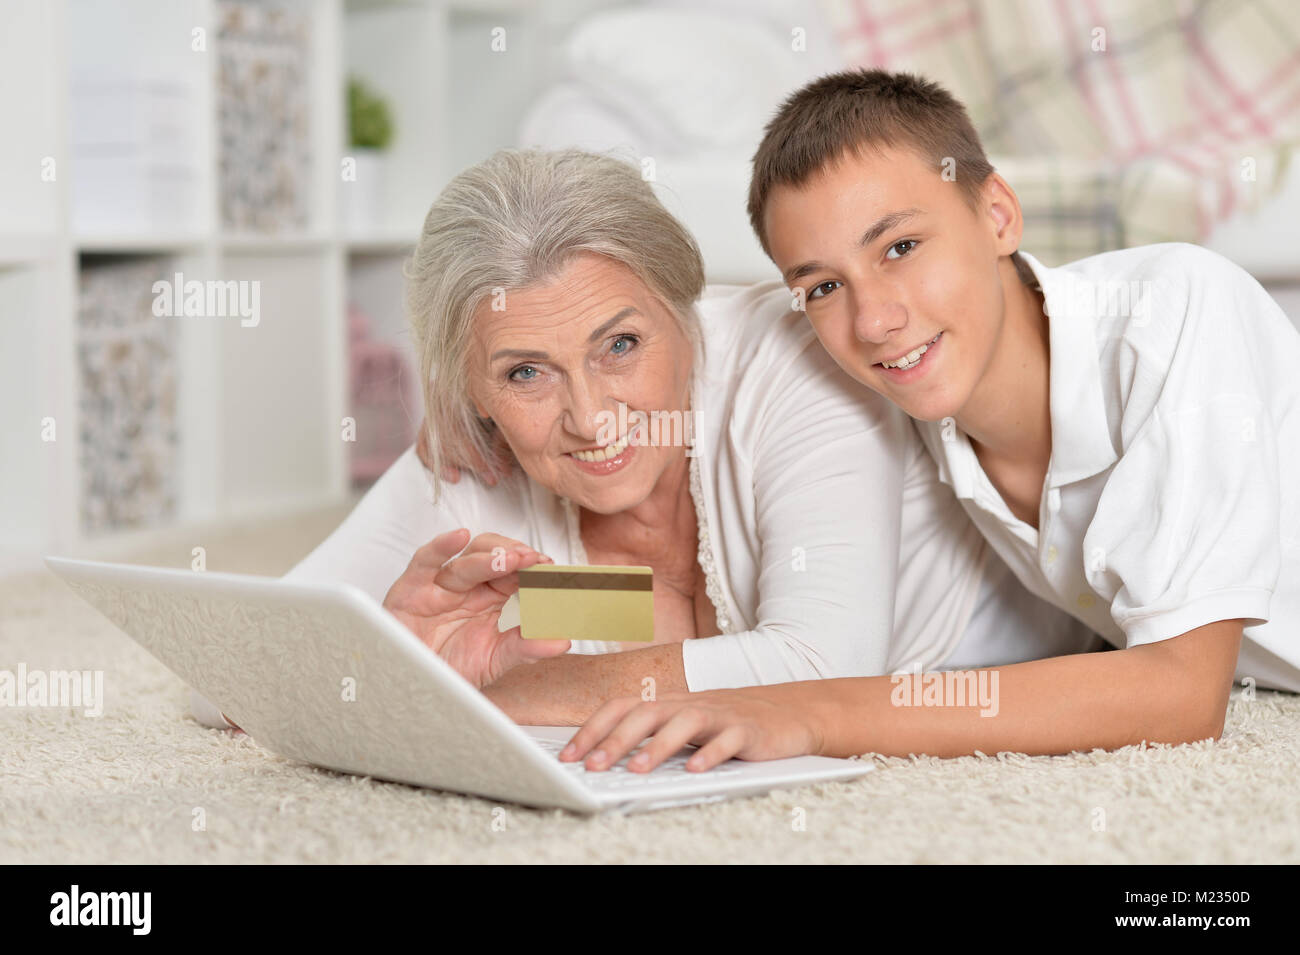 grandmother and grandson using laptop, online shopping concept Stock Photo